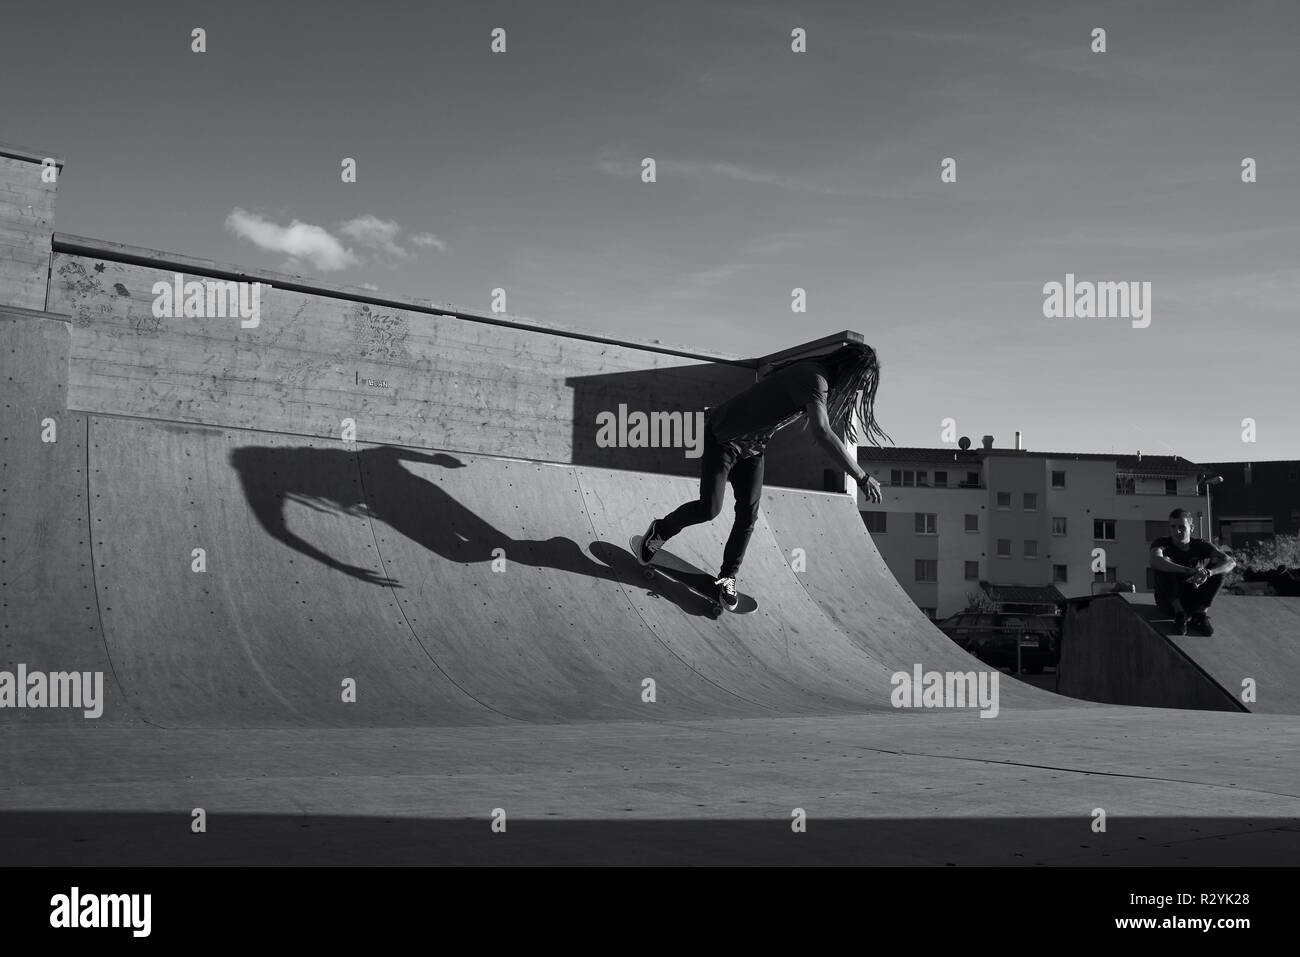 Black and White image of a Skateboarder in a Halfpipe Stock Photo